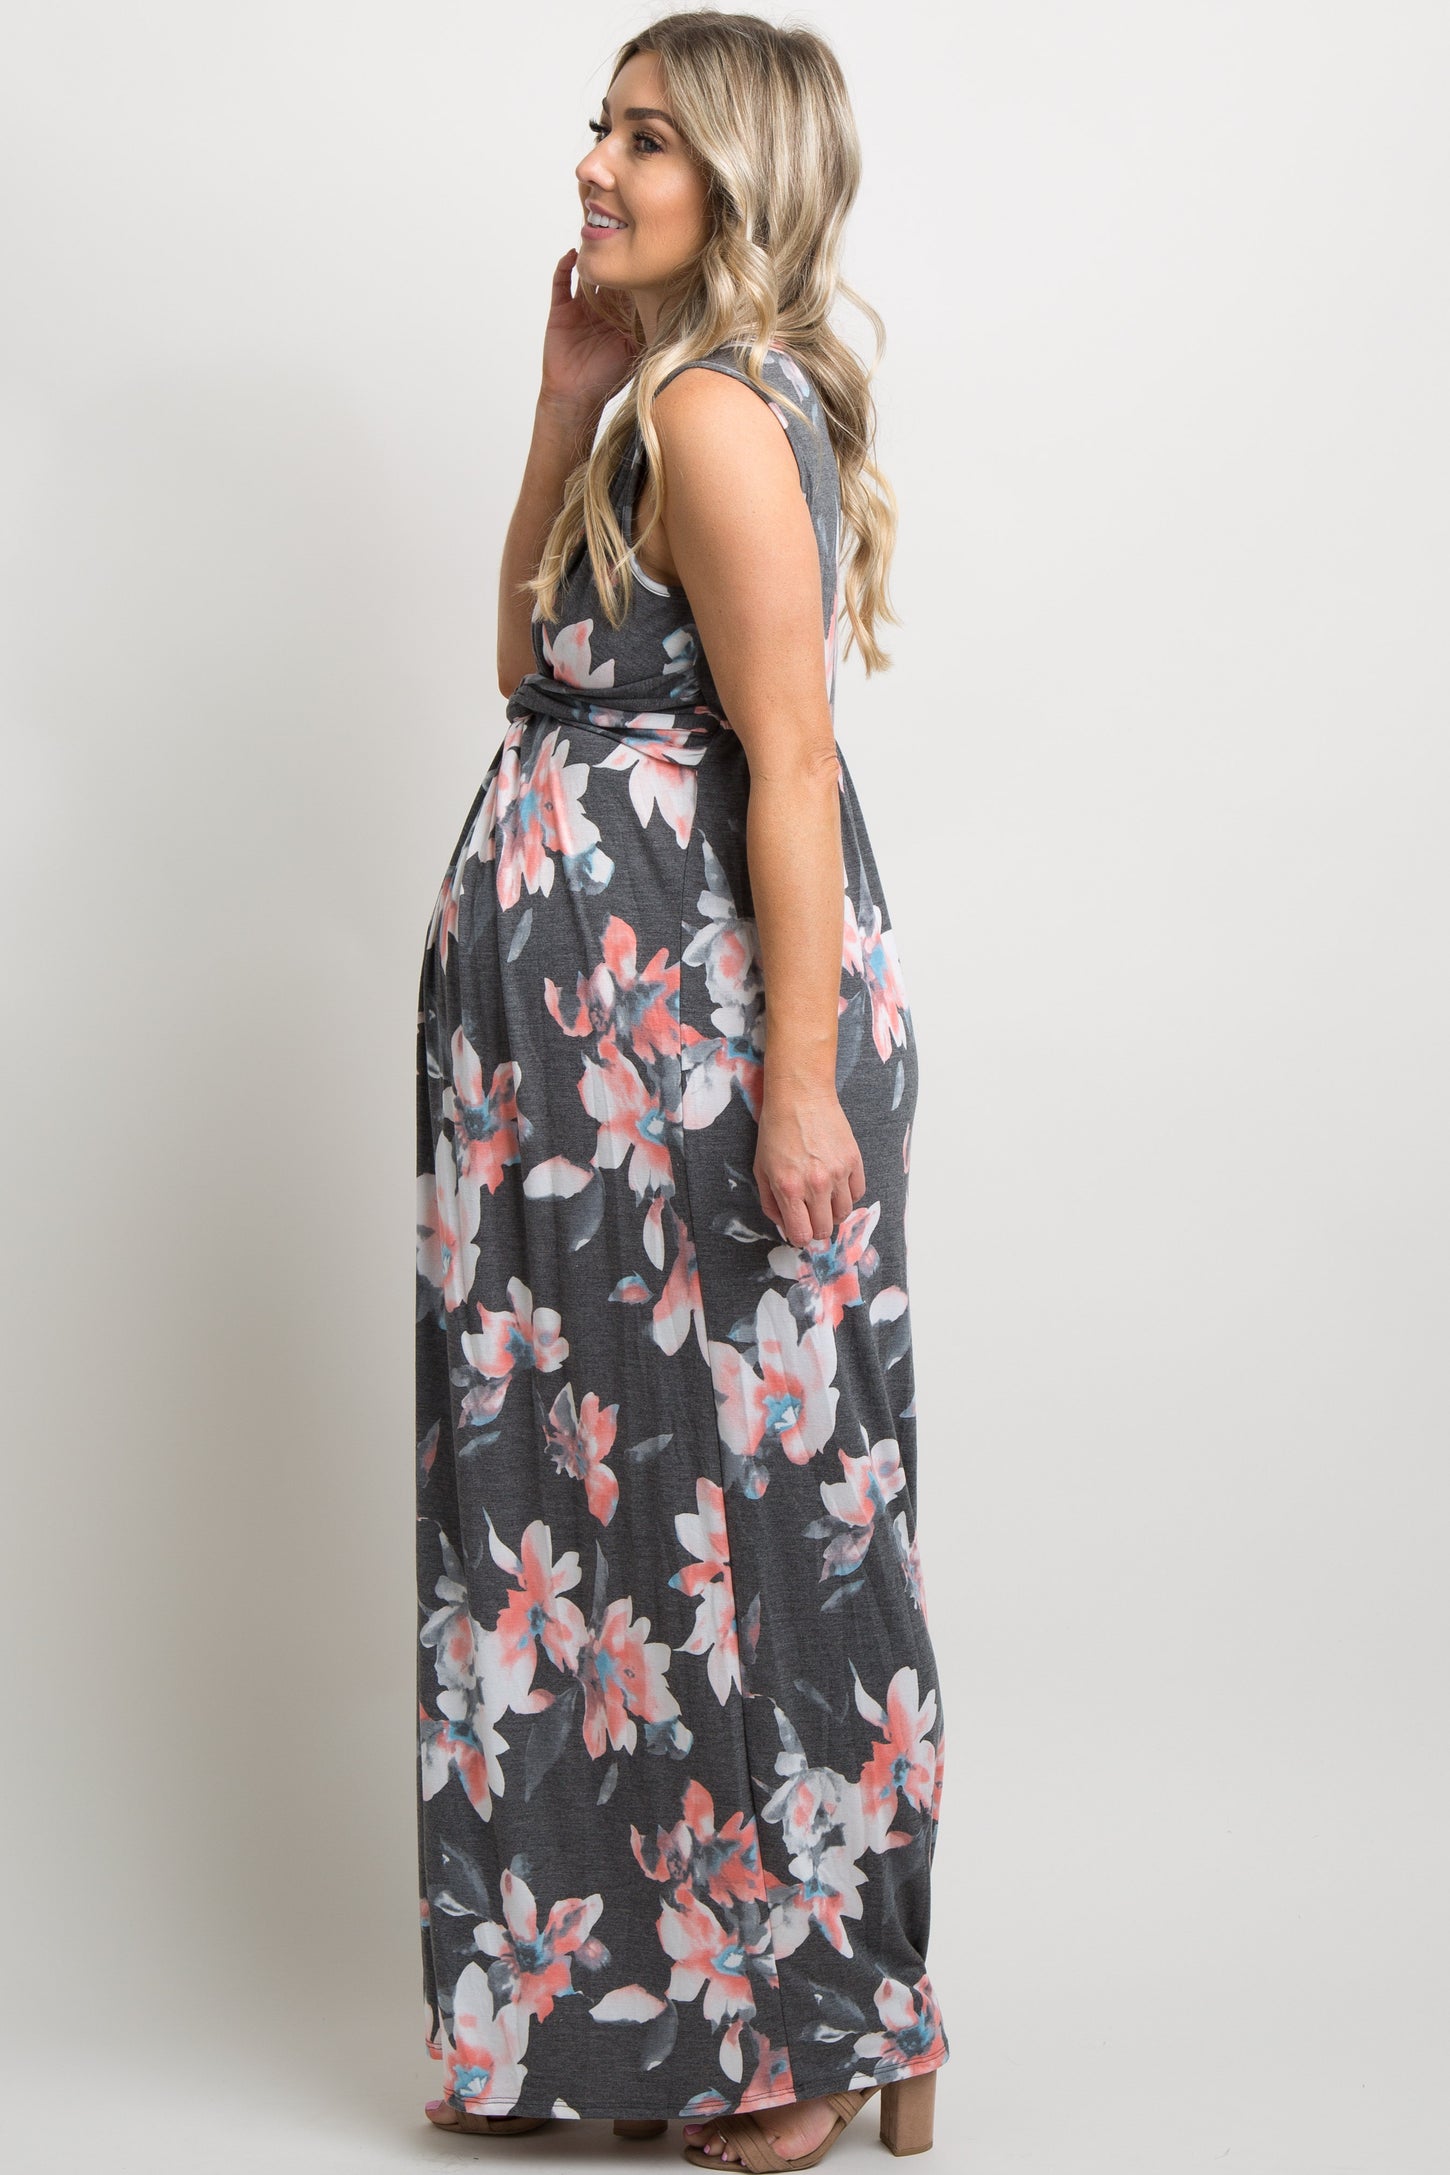 Charcoal Grey Floral Sleeveless Knot Front Maternity Maxi Dress